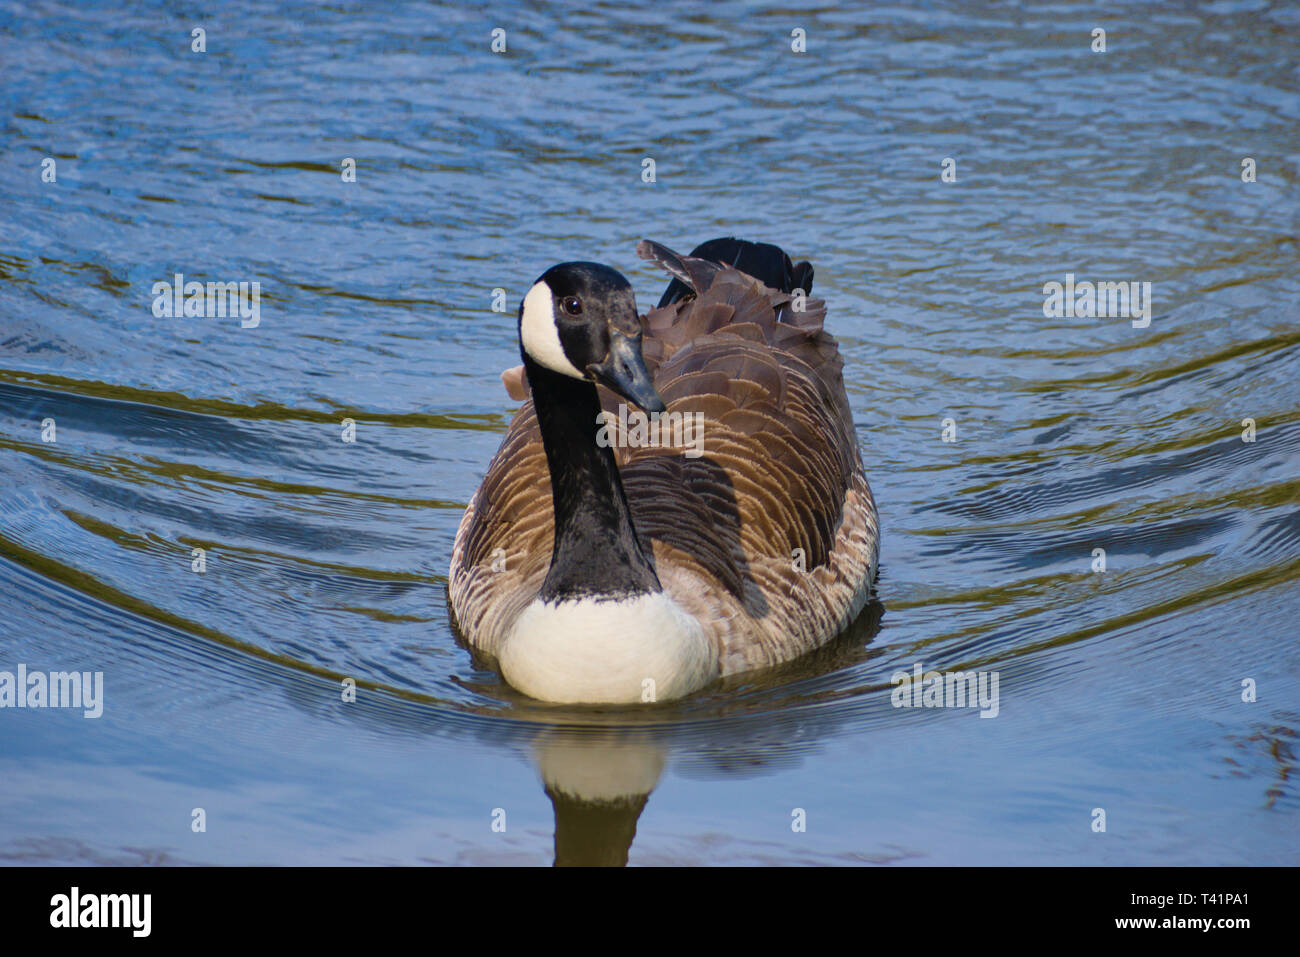 Canada goose in water Stock Photo